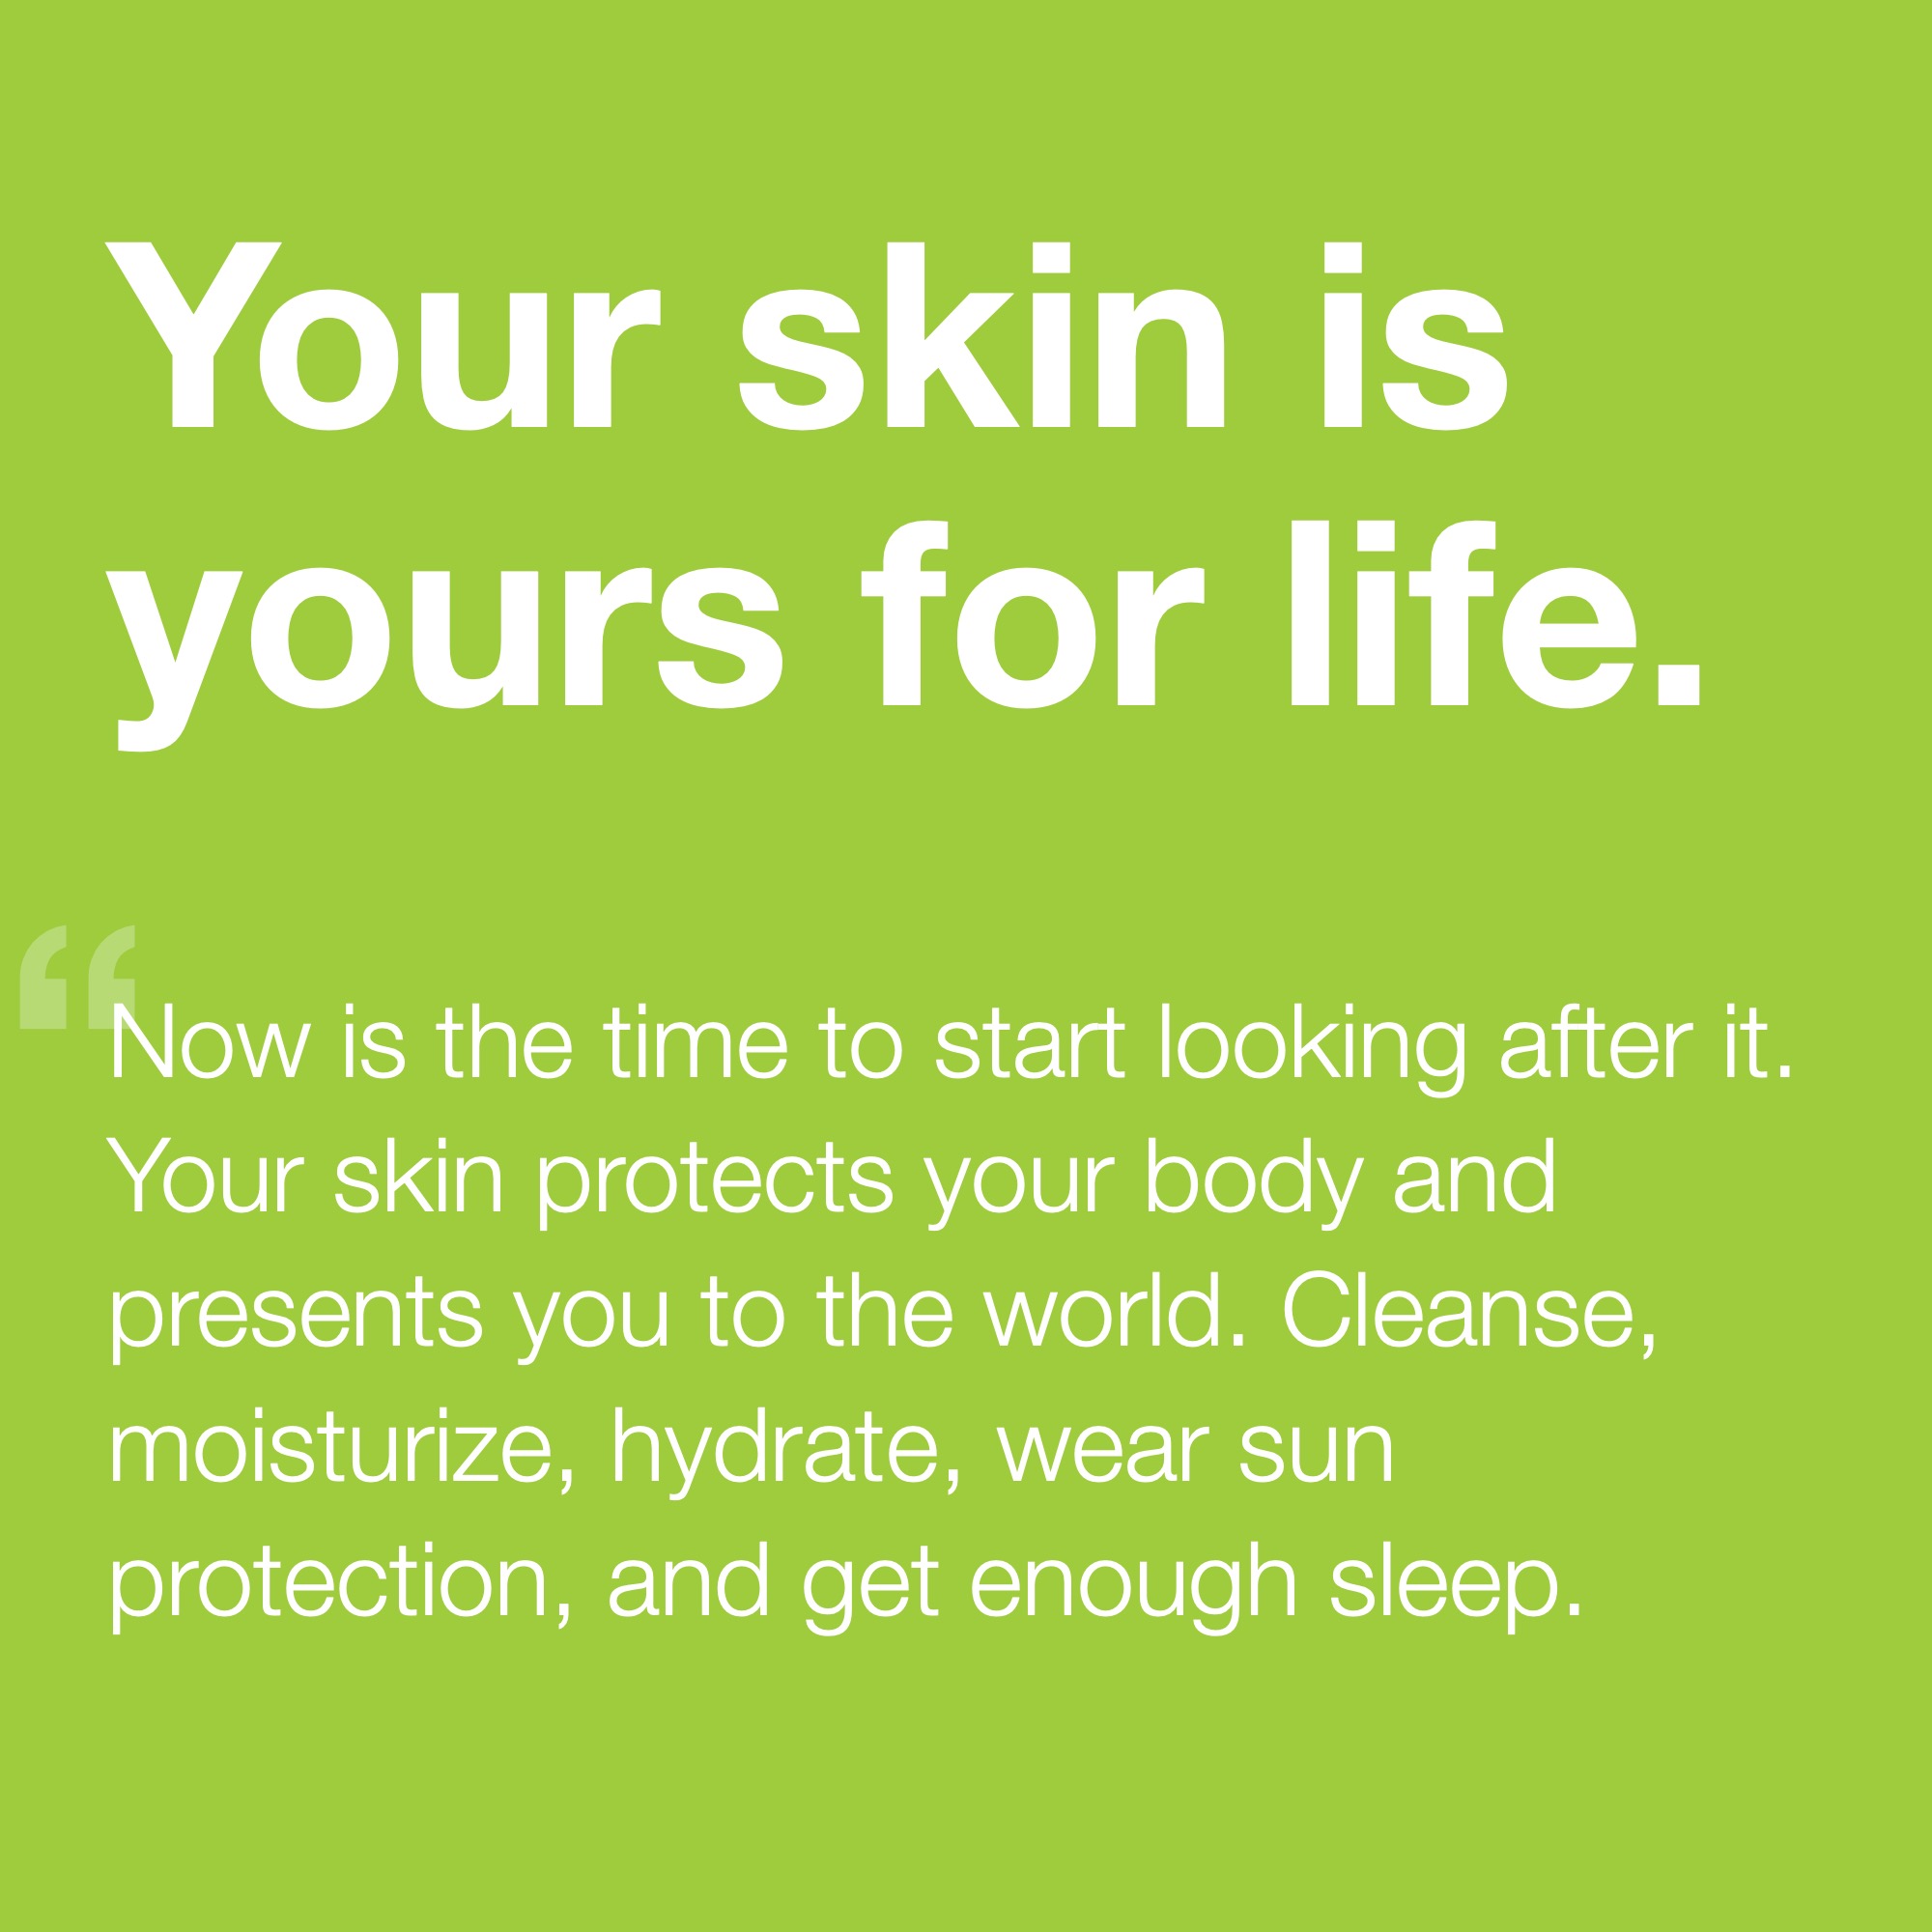 Your Skin is Yours For Life